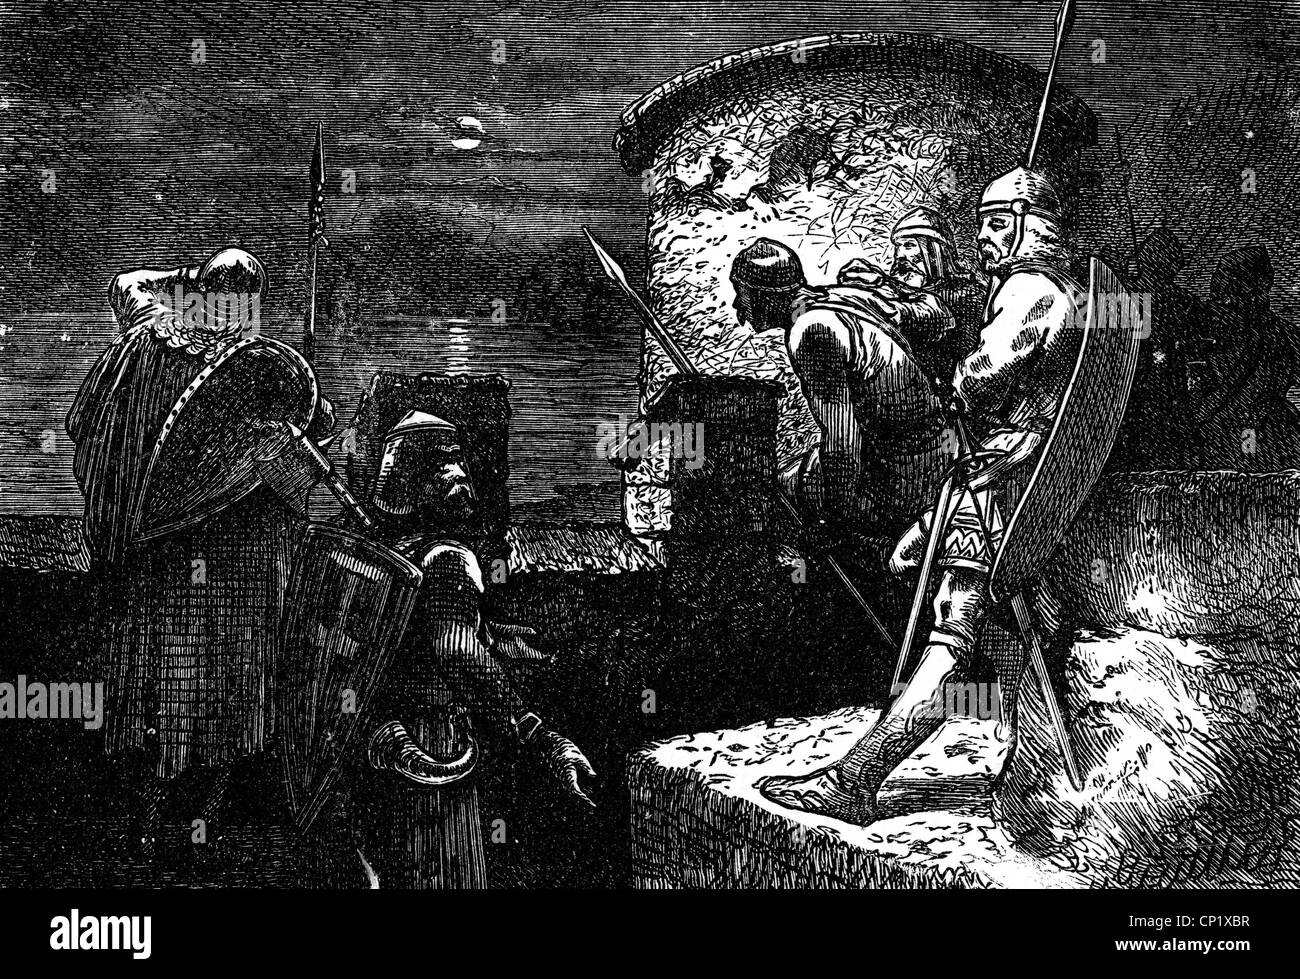 Middle Ages, Vikings, soldiers on the lookout for Northmen, wood engraving, 19th century, medieval, mediaeval, Frankish Empire, soldiers, soldier, warrior, warriors, castle, castles, city wall, city walls, shield, shields, lance, lances, guard, historic, historical, people, Additional-Rights-Clearences-Not Available Stock Photo